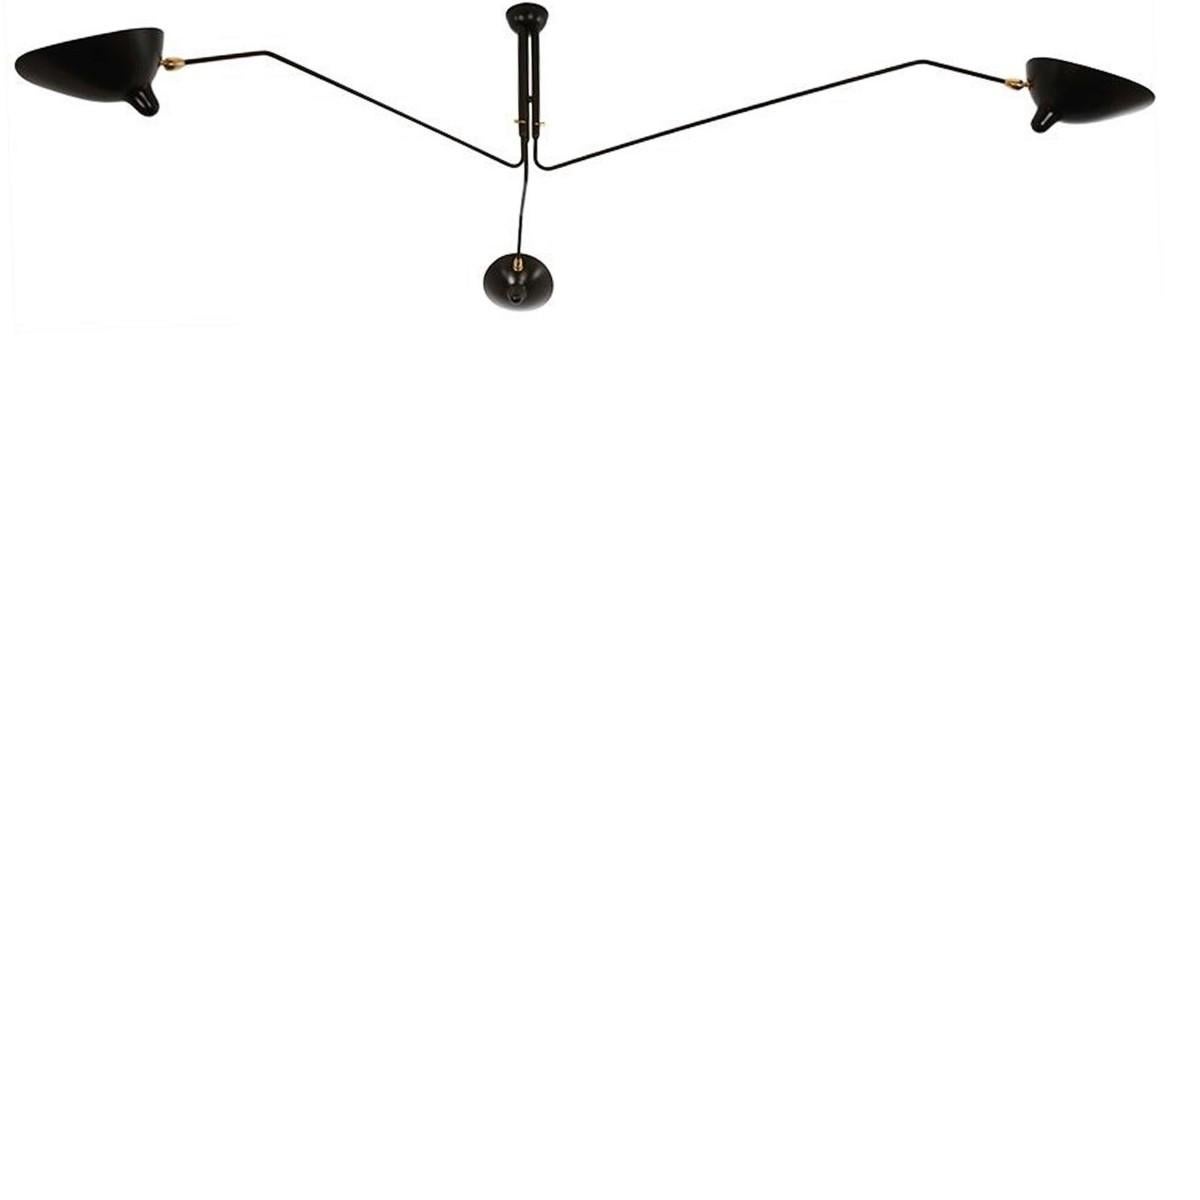 Three-arm adjustable ceiling lamp in black lacquered aluminum and steel with brass ball joints by Serge Mouille. Signed. French, circa 1980.